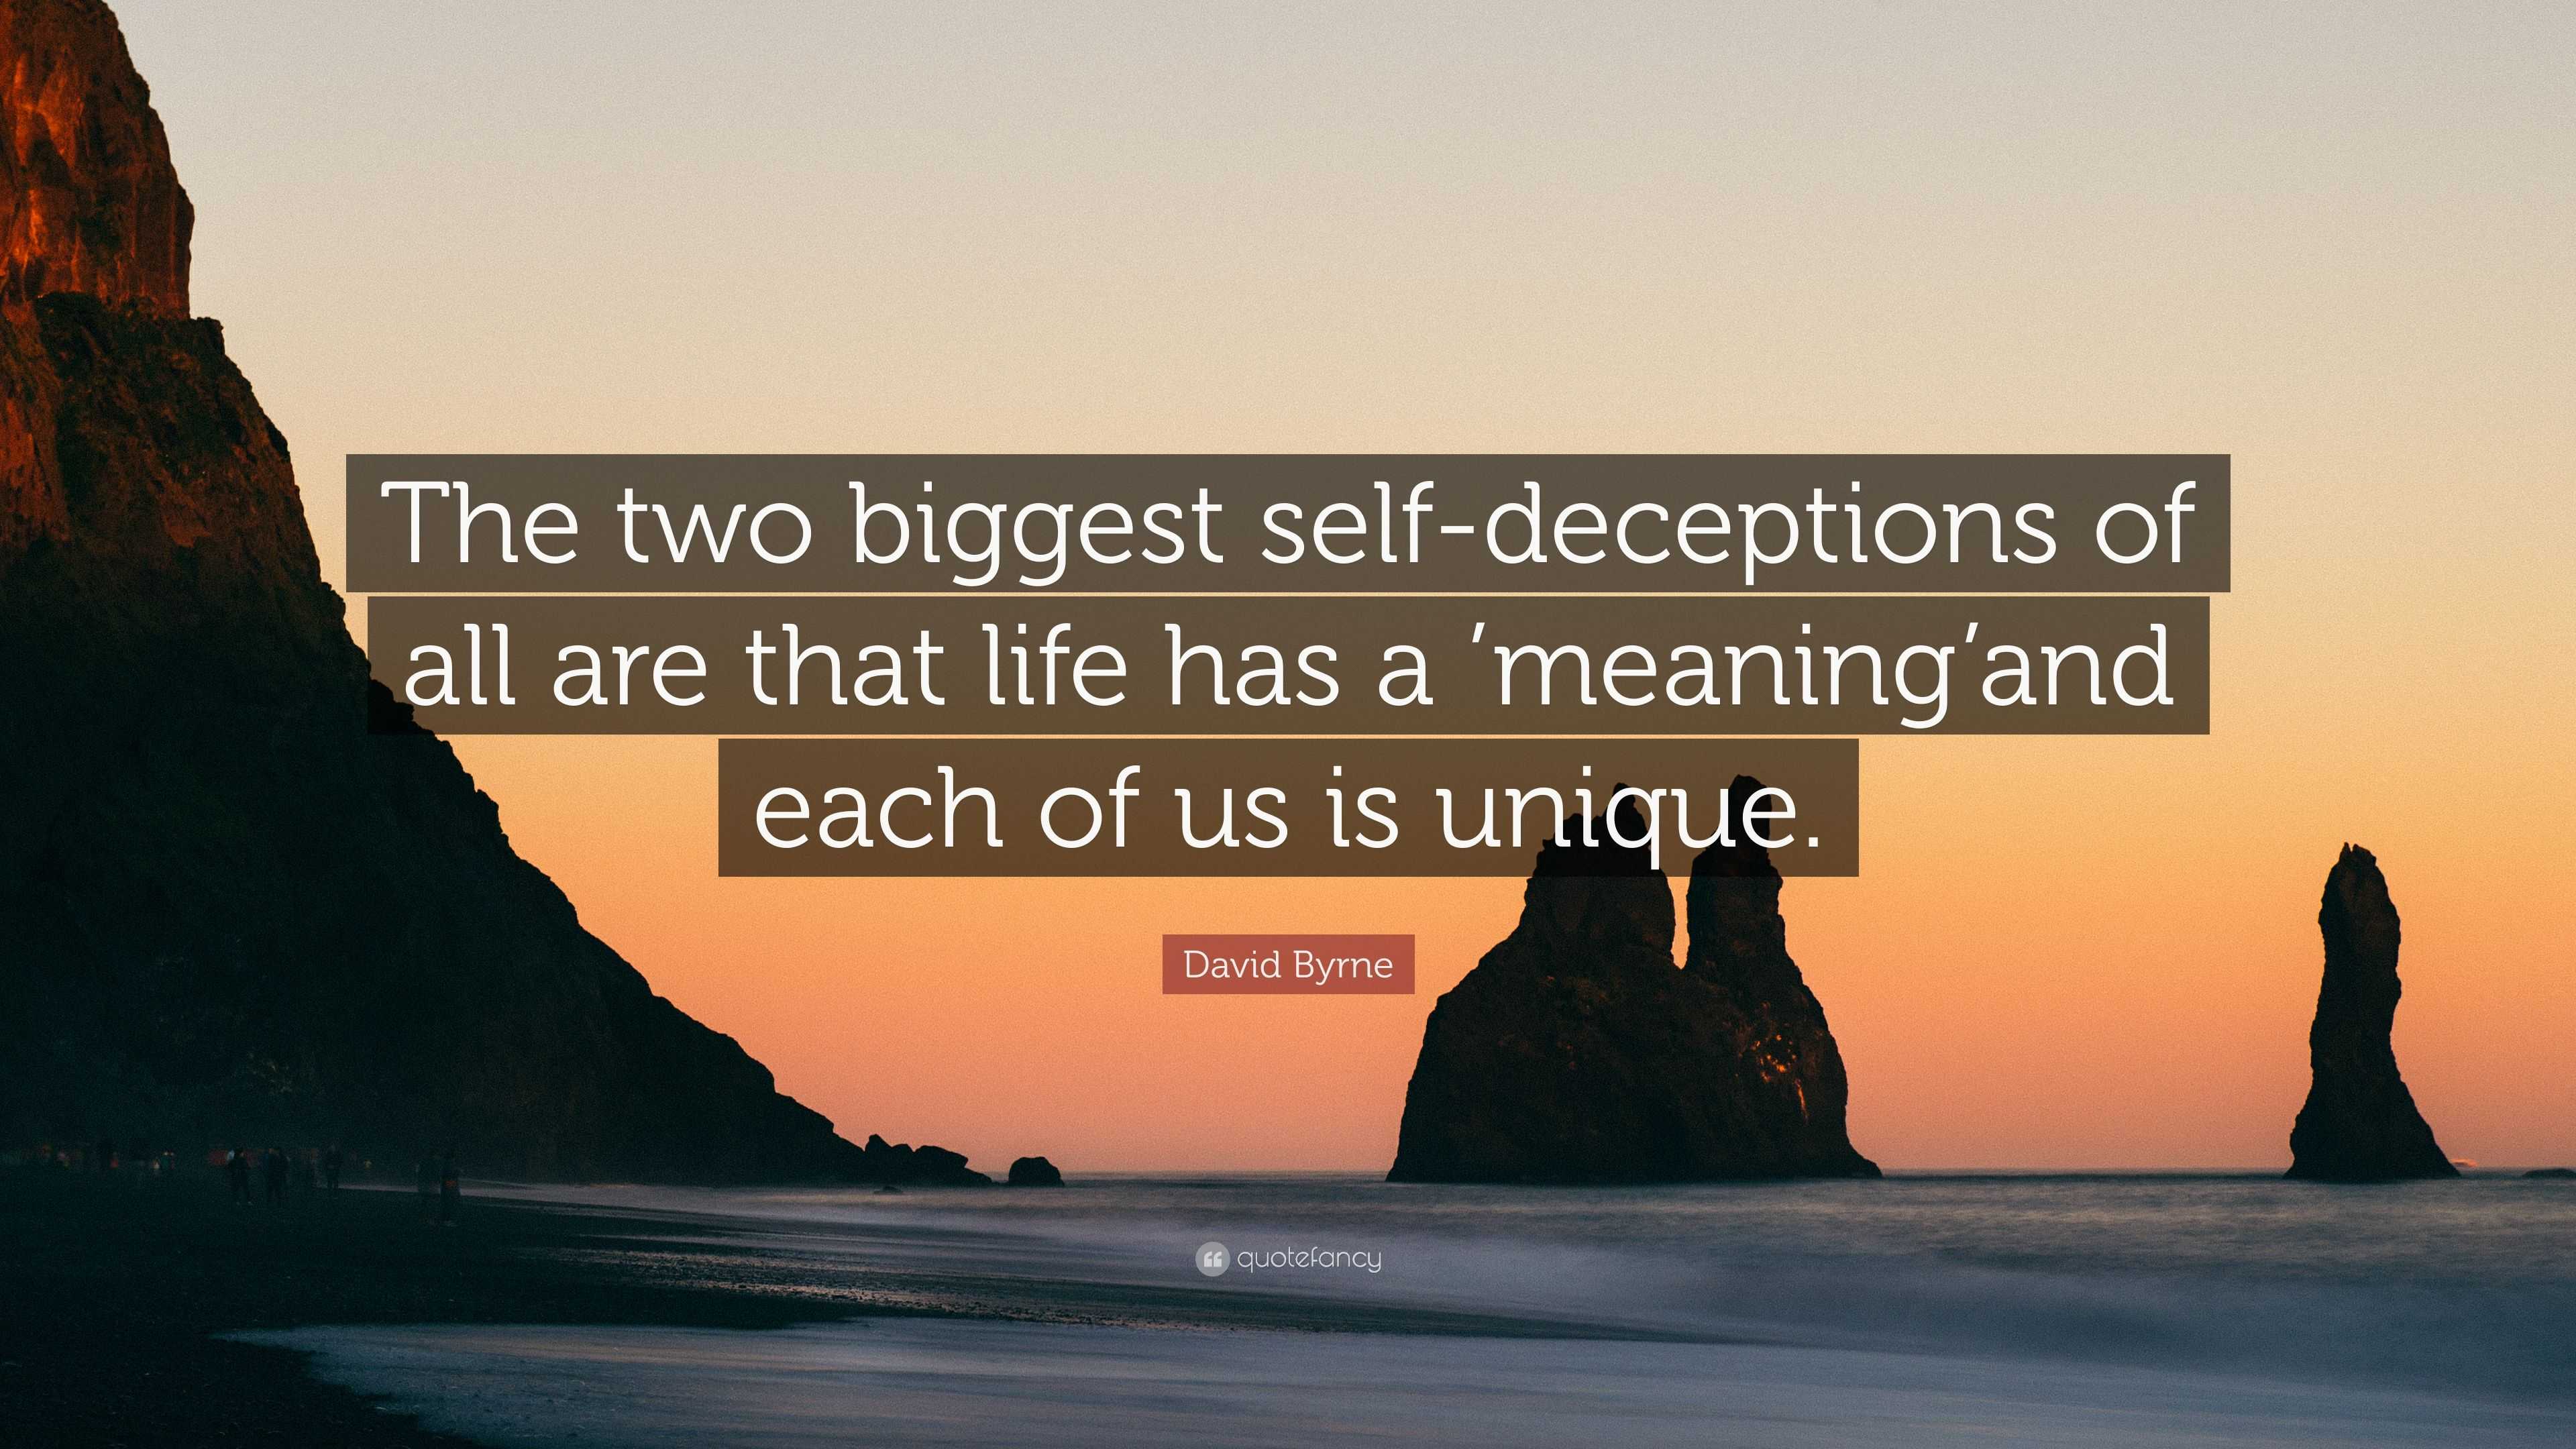 David Byrne Quote The Two Biggest Self Deceptions Of All Are That Life Has A Meaning And Each Of Us Is Unique 6 Wallpapers Quotefancy